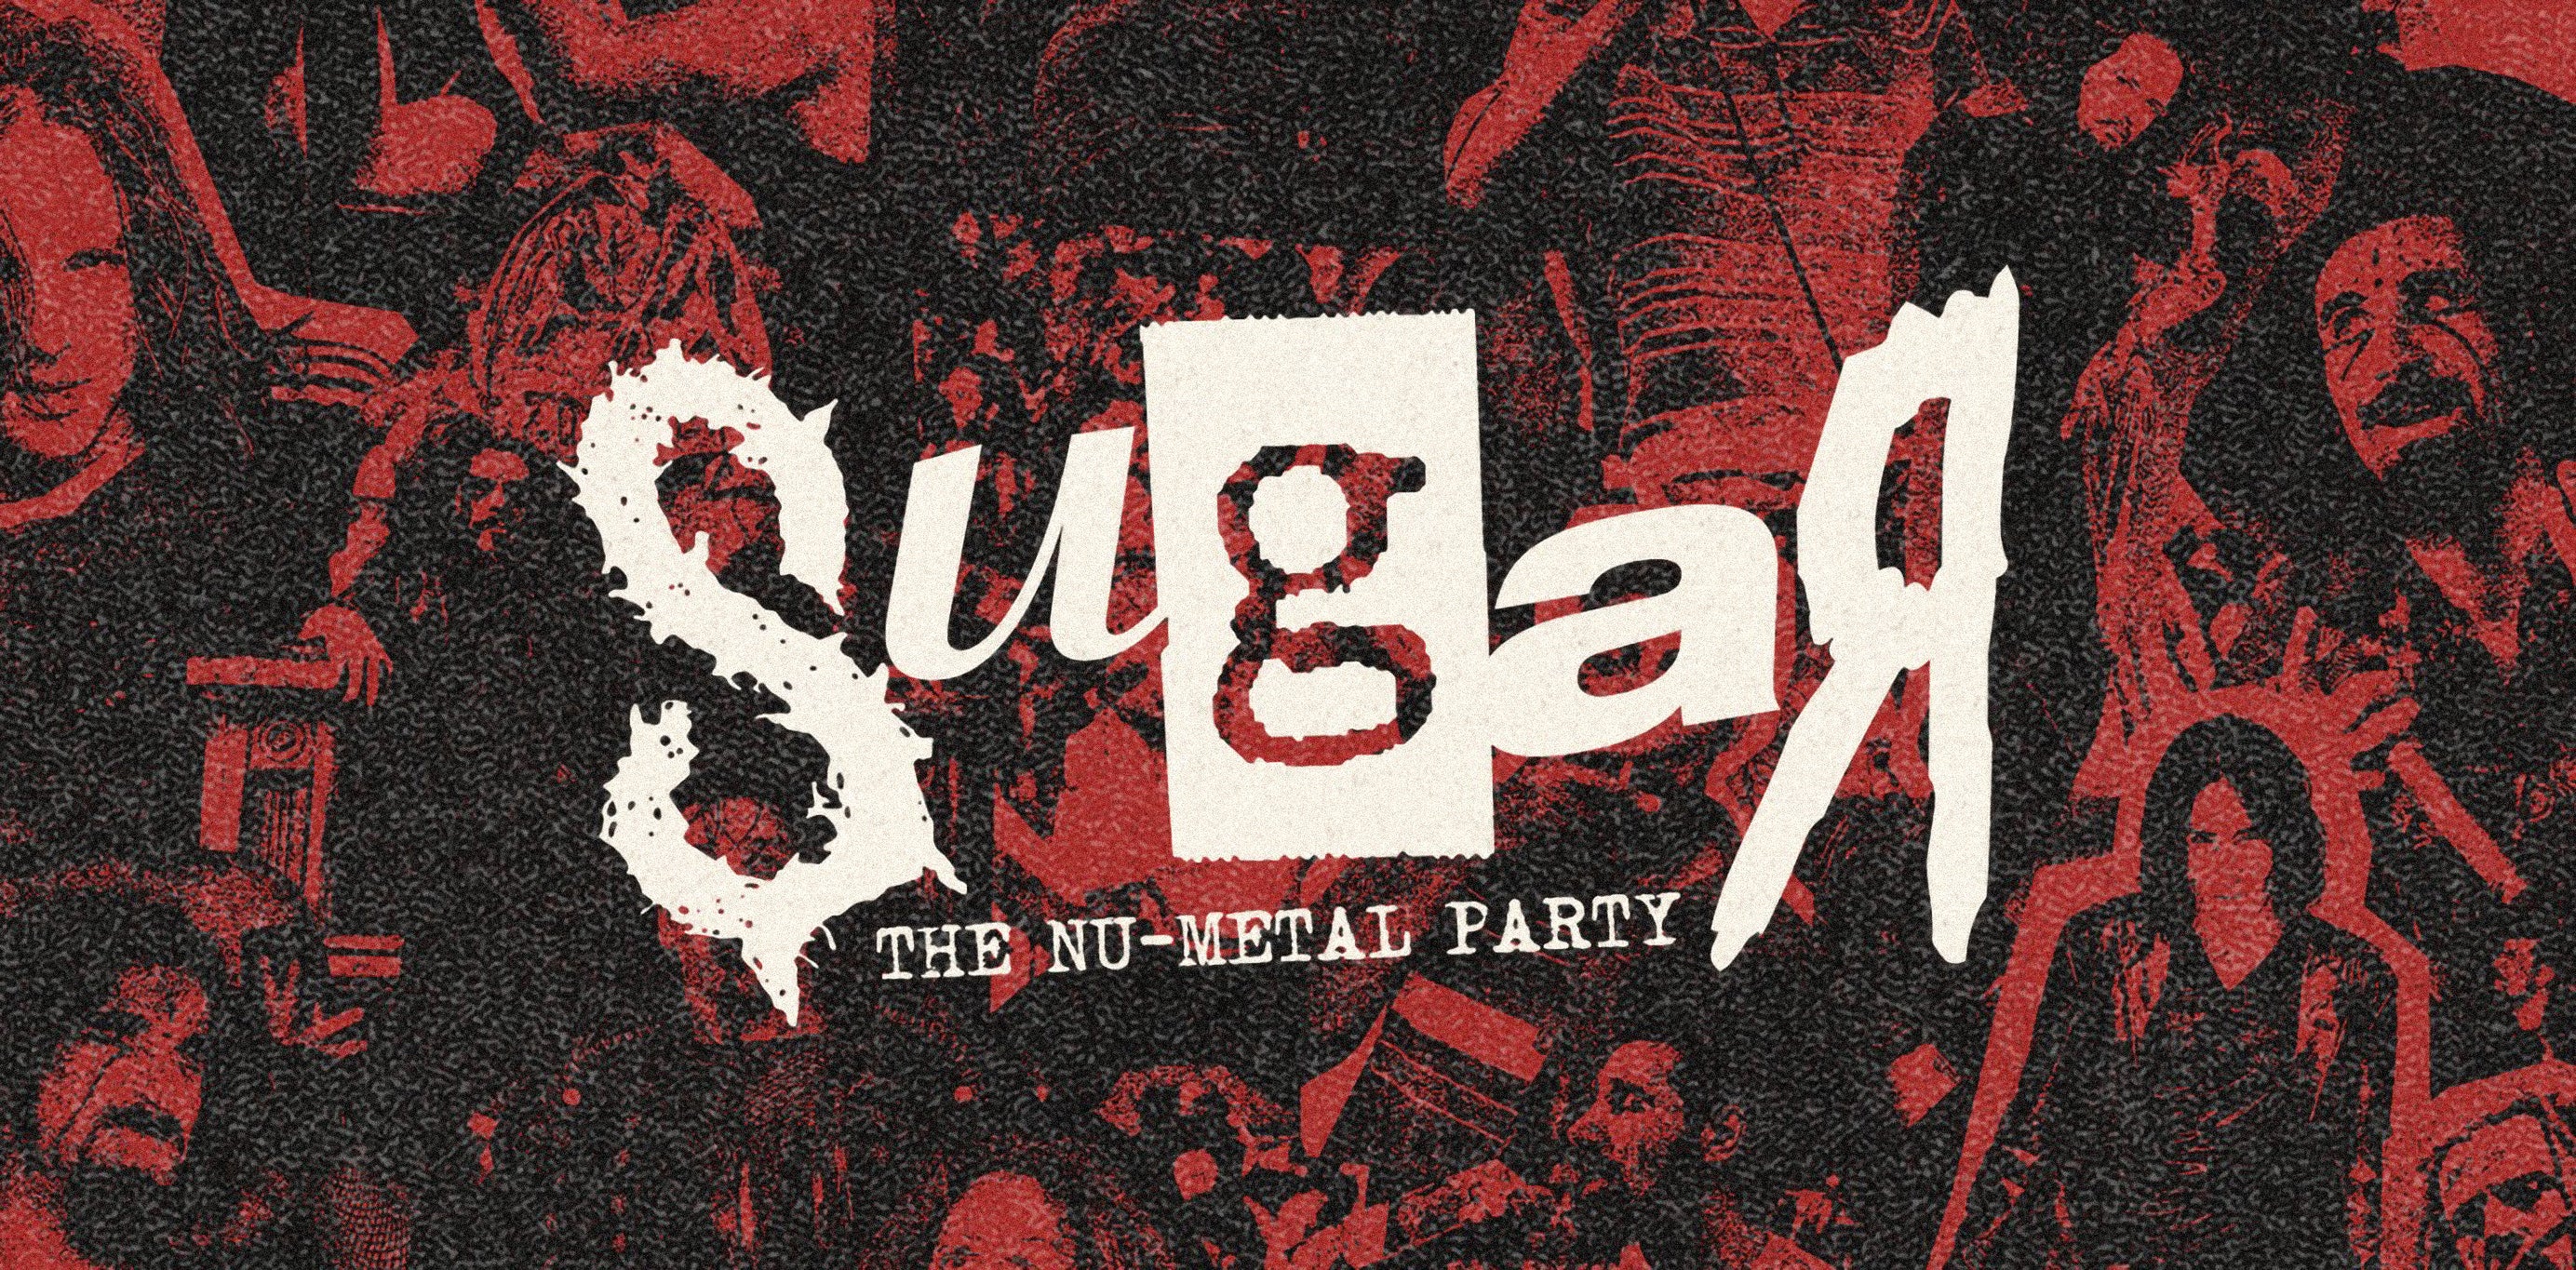 Sugar: The Nu-Metal Party 18+ presale password for show tickets in Sacramento, CA (Ace of Spades)